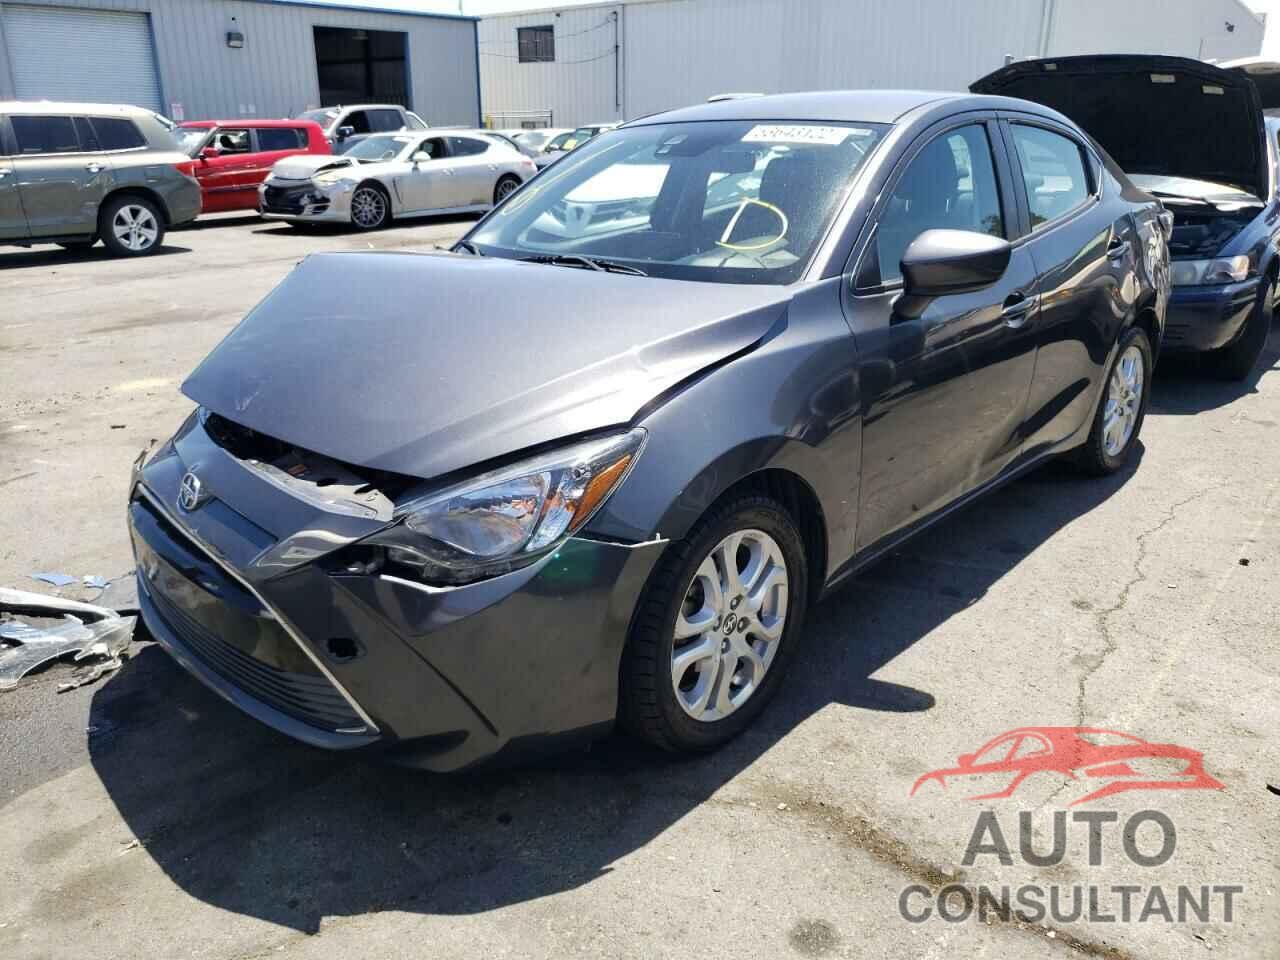 TOYOTA ALL OTHER 2016 - 3MYDLBZV9GY100084